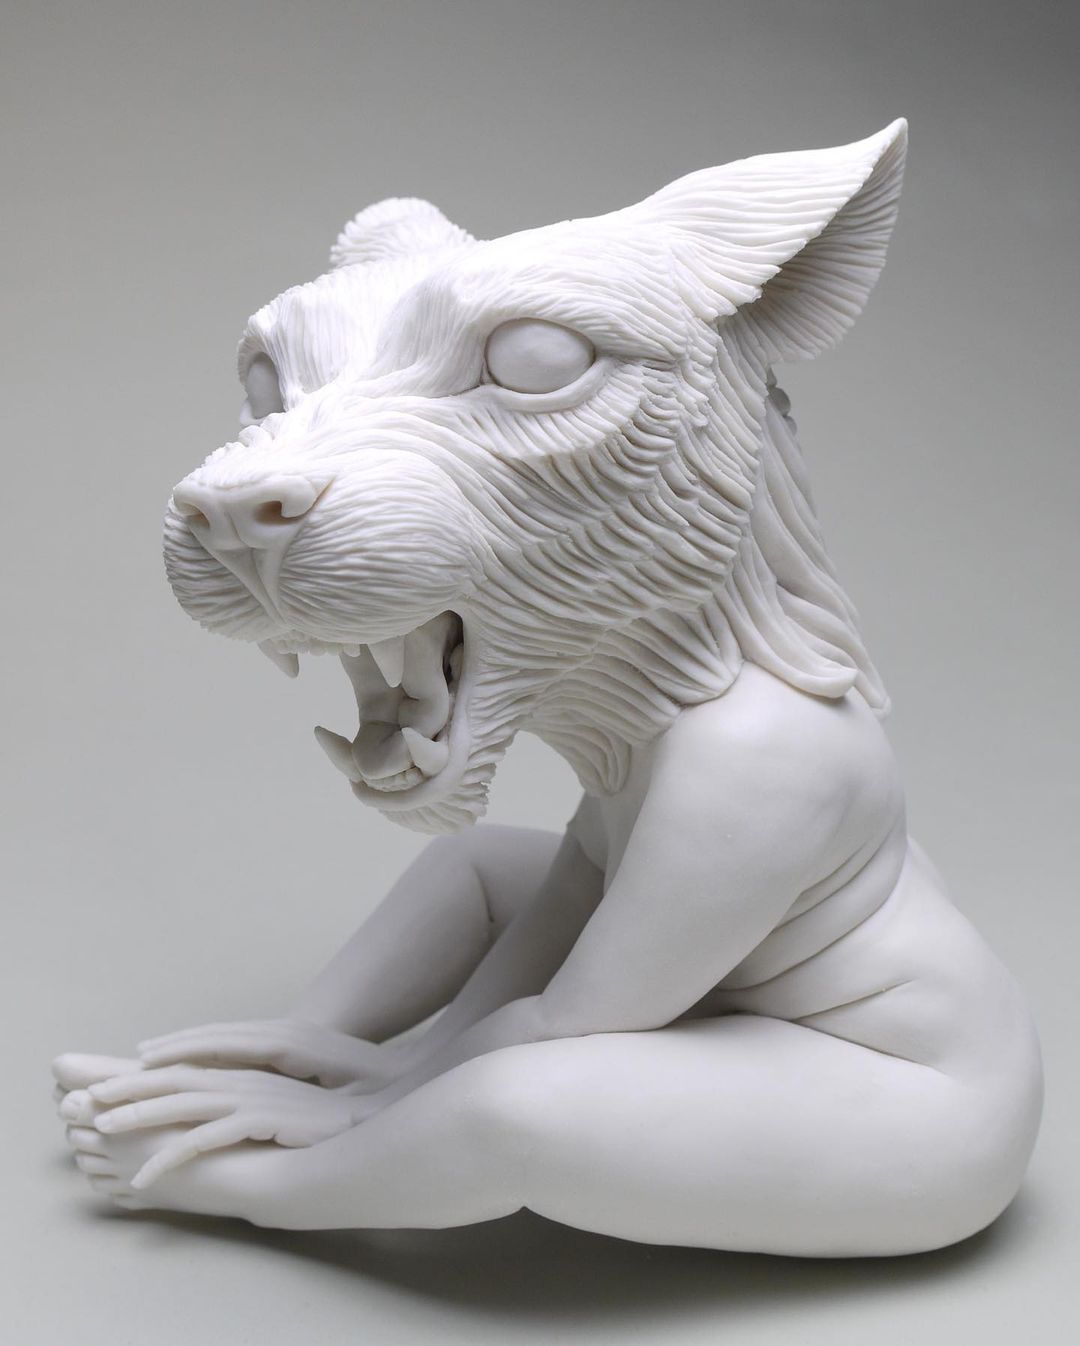 Fabulous Sculptures Of Human Animal Hybrids By Crystal Morey 16